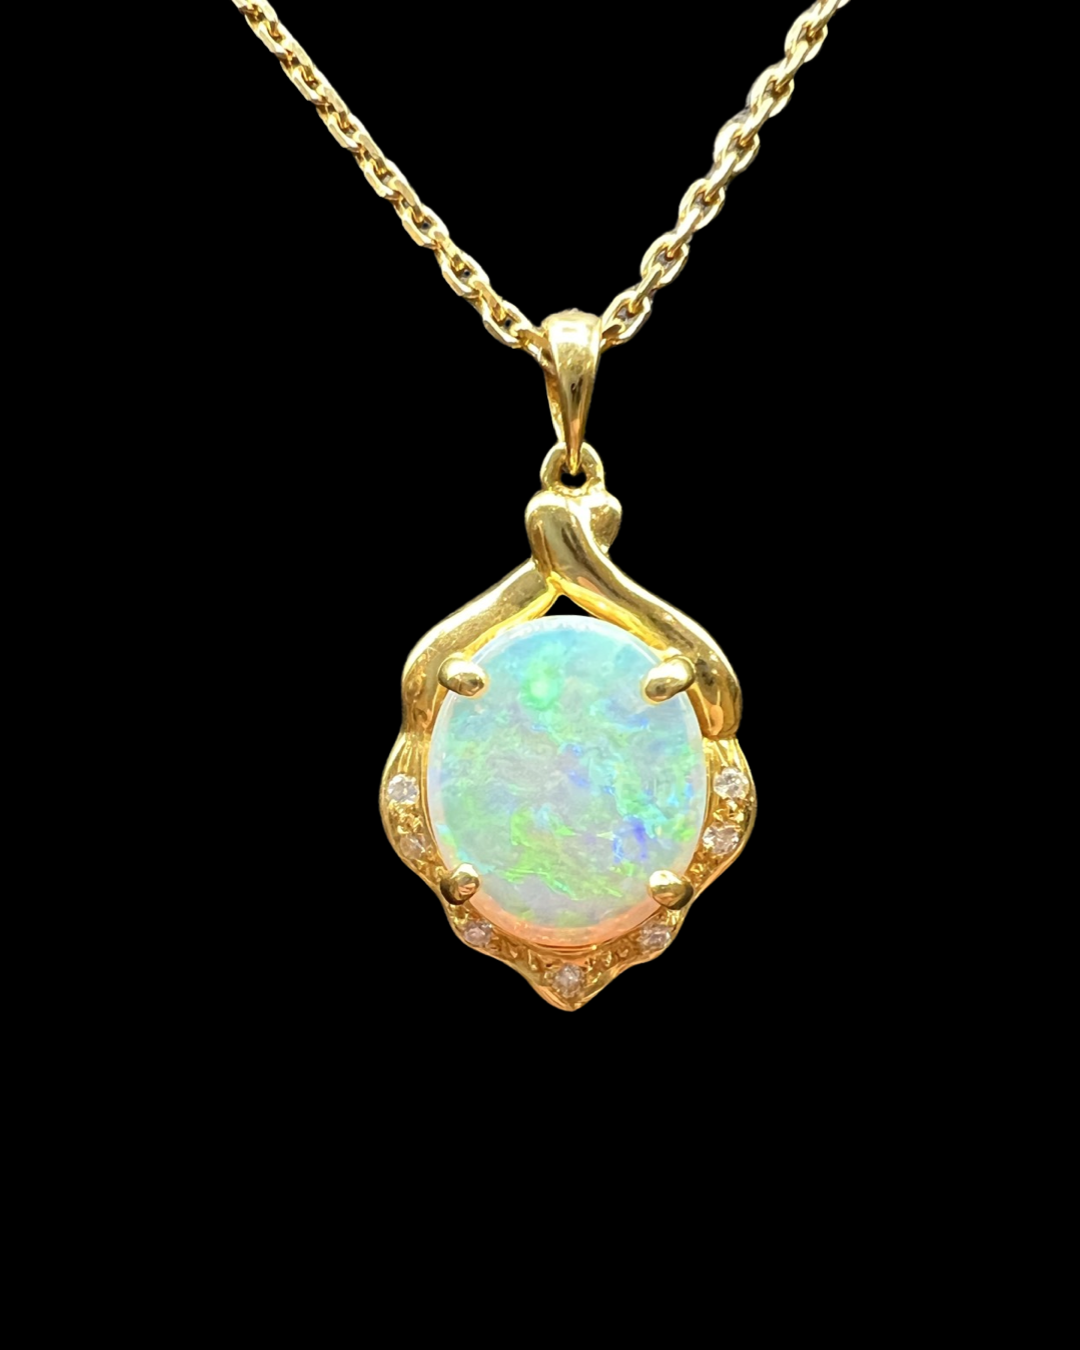 18ct Gold Large Oval Opal & Diamond Pendant & Chain 45cm in length - Opal 12mm x 10mm - 6.2grams - Image 2 of 2